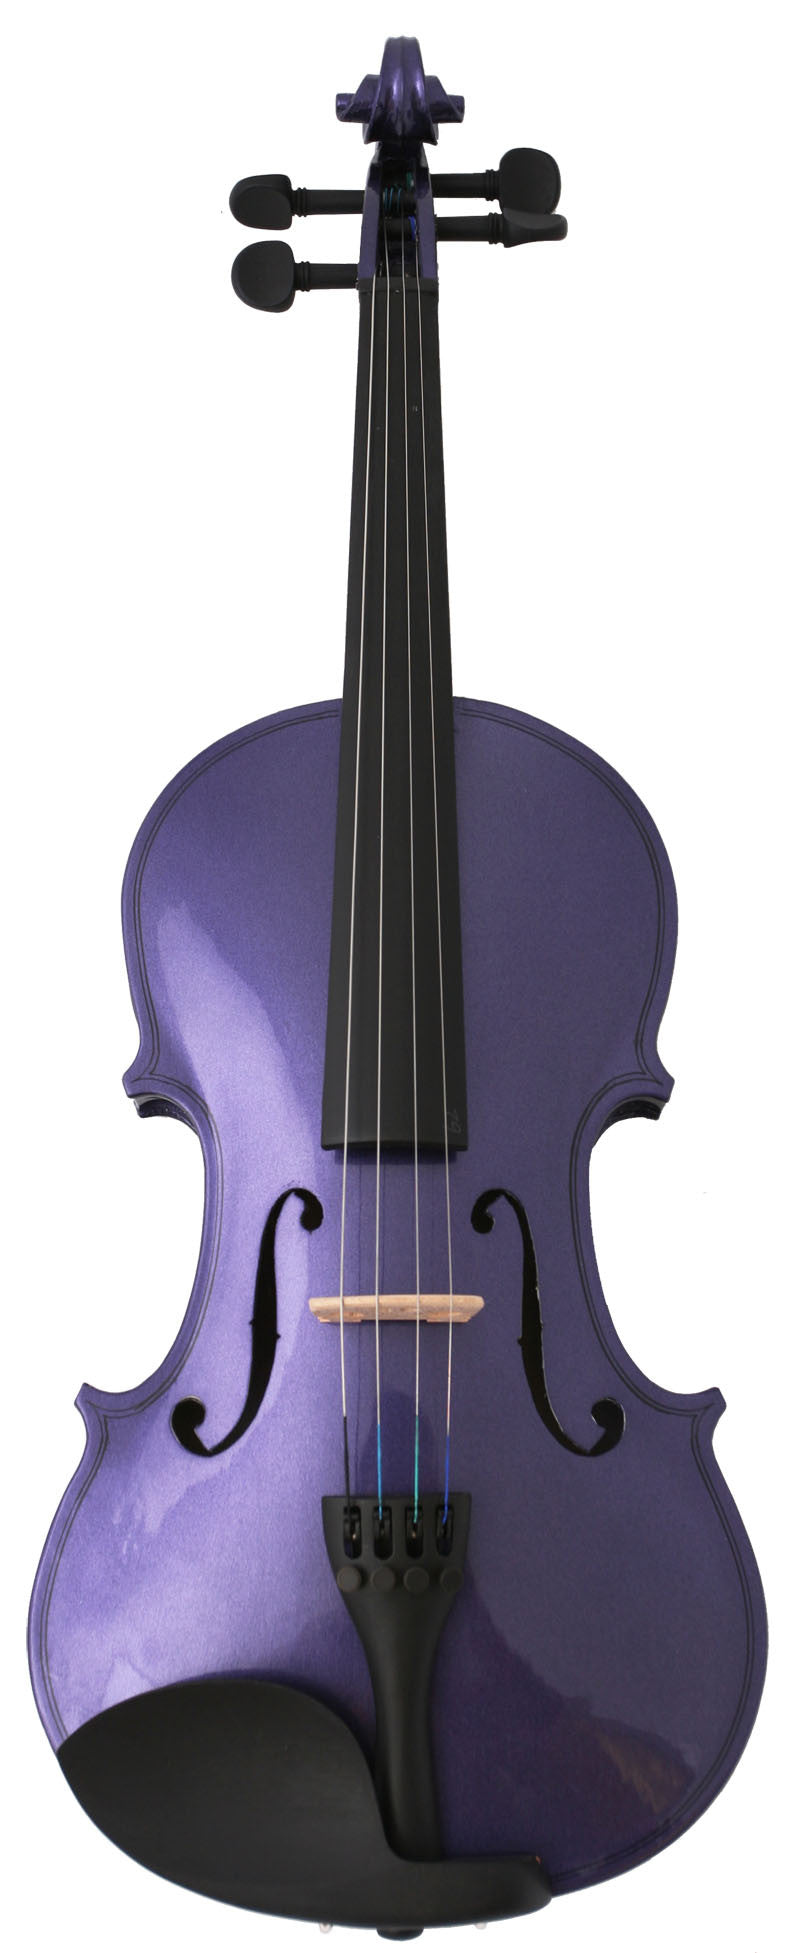 Crescent Direct Vl-prm1/2 1/2 Purple Maplewood Acoustic Violin With Case, Rosin, And Bow